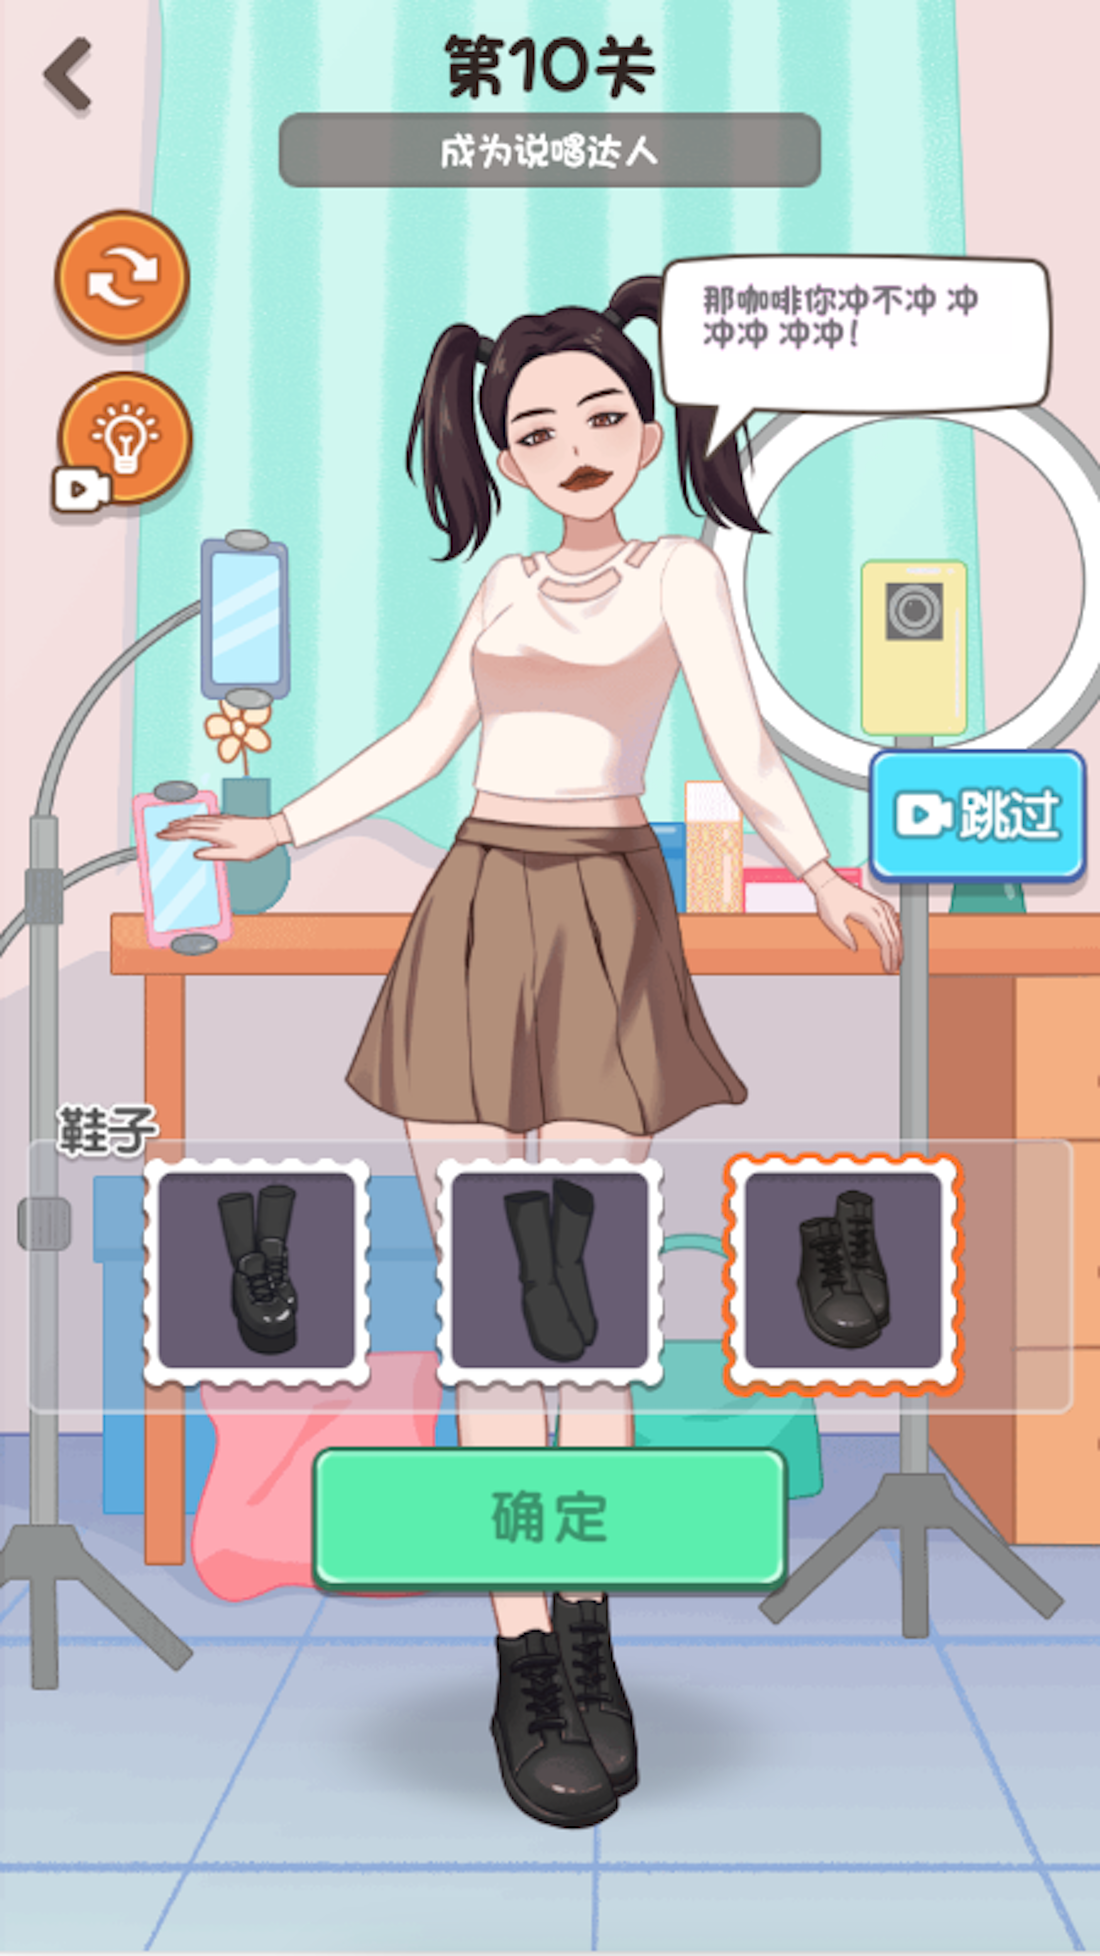 Hundreds of clothes dress up differently to see you show off dress up simulator game mobile android iOS apk download for